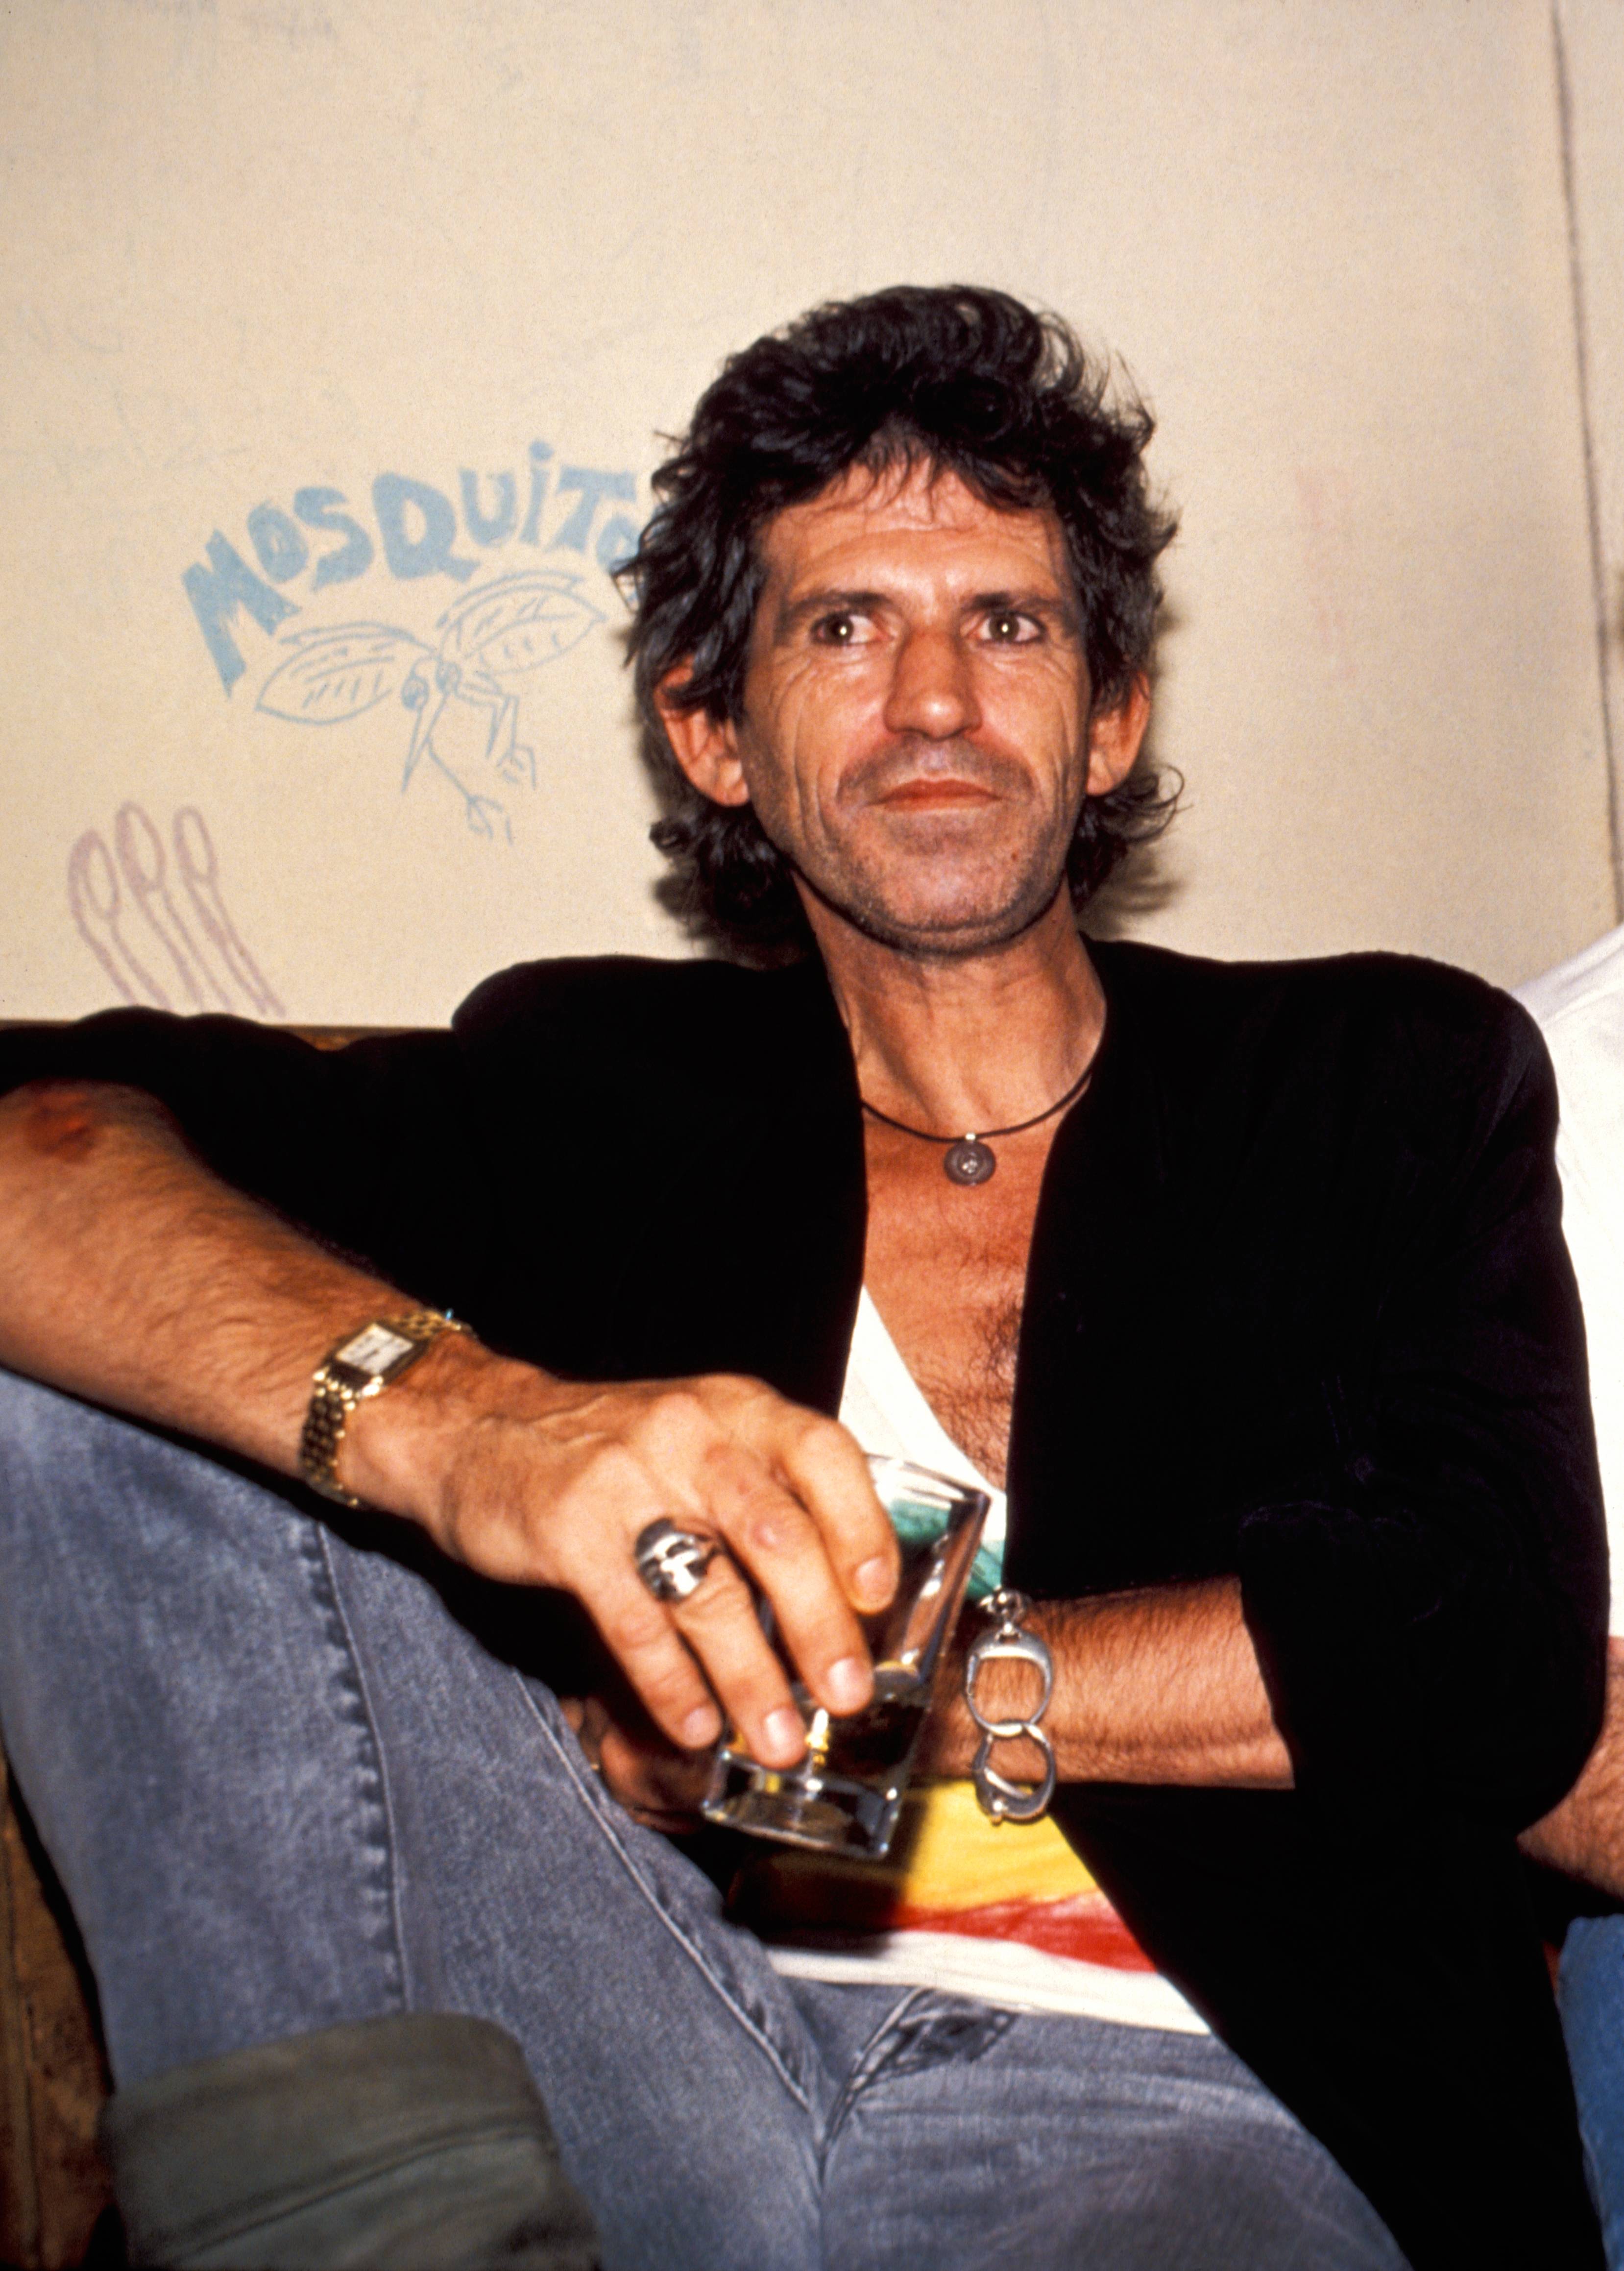 Keith Richards: Our 1985 Cover Story, <i>
<p><b>How is Anita [Pallenberg, mother of his first two children]?</b></p>
<p>Anita’s doing very well. Very well. Cleaned up her whole act. I’m very proud of her. Her and Patti actually talk to each other. I’m either very lucky or I’ve done something right. There is nothing hidden from anybody. They talk to each other, visit each other. And Anita still knits me sweaters.</p>
<p>Maybe it’s because we never had the divorce thing. By not getting married and divorced, where the lawyers force you to hate each other, just from the point of “As your lawyers, Mrs. So-and-so, I advise you to get this much out of that sonofabitch.” And I suggest we change the venue of this divorce, Mr. So-and-so, because they can’t screw so much out of you here.” So you become implacable enemies. Anyone that survives a divorce and still talks to each other is a miracle. People can actually get along a lot better without resorting to the law.</p>
<p><b>Then why did you make it legal with Patti?</b></p>
<p>Because it’s me now, and it’s Patti, and it’s a different point of view. Anita and I, in the ’60s, were never interested in marriage. It seemed an archaic and dumb thing to do just to have a child. And that was then and that was Anita, and that was me and Anita. Patti and I have a different relationship.</p>
<p>And besides, shit, I’m gonna try anything. And if I’m gonna try anything like marriage, I’m only gonna try it once. And if I’m gonna try it once, it’s gonna be with this chick. ‘Cuz I’m not about to try it twice. I ain’t a Texan, I ain’t Bobby Keys—if he loves her, he’s gotta marry her. It’s just a different point of view. For me, it’s worked out fine, ‘cuz I can still talk to my ex-whatever. And there are other exes before Anita, and I can still talk to <i>them</i>.</p>
<p><b>How did you meet Patti?</b></p>
<p>It was engineered by other people, matchmakers. It was my birthday [1979]. We were all in New York. A few people had the same idea at the same time for a year before I ever met Patti. Every other night, somebody would say, “Oh, you should meet this Patti Hansen.” I kept asking, “Why should I meet this Patti Hansen.” I found out later. But it was one of those inevitable things. She was getting the same stuff. Until eventually somebody said, “They’re never gonna get it together themselves. We have to throw them together.”</p>
<p><b>What did her family think of you at first?</b></p>
<p>The first time I went to meet her parents, I was out of it. Out of my brain. I’d been up for days, got drunk, figured I’d keep myself real mellow. Instead, I wound up smashing up stuff. But they dug it. I went crazy and it didn’t offend them. I could’ve blown it, you know, “Never come back here again!” I was my worst.</p>
<p>After all this time, I’d never been through this trip, meeting a girl’s parents, so it was important to me. Try to be real cool, and I overdid it. I went totally over the top. But they dug me for it. That was the first indication that this was family I could do with if they could take that.</p>
<p><b>The old “Would you let your daughter marry a Rolling Stone?”</b></p>
<p>I’m still not finished with that, after all these years. Once those things are pinned on you, they stick with you forever. It might seem slightly silly when you’re 60 or 70 years old.</p>
</p><p>To see our running list of the top 100 greatest rock stars of all time, <a href=